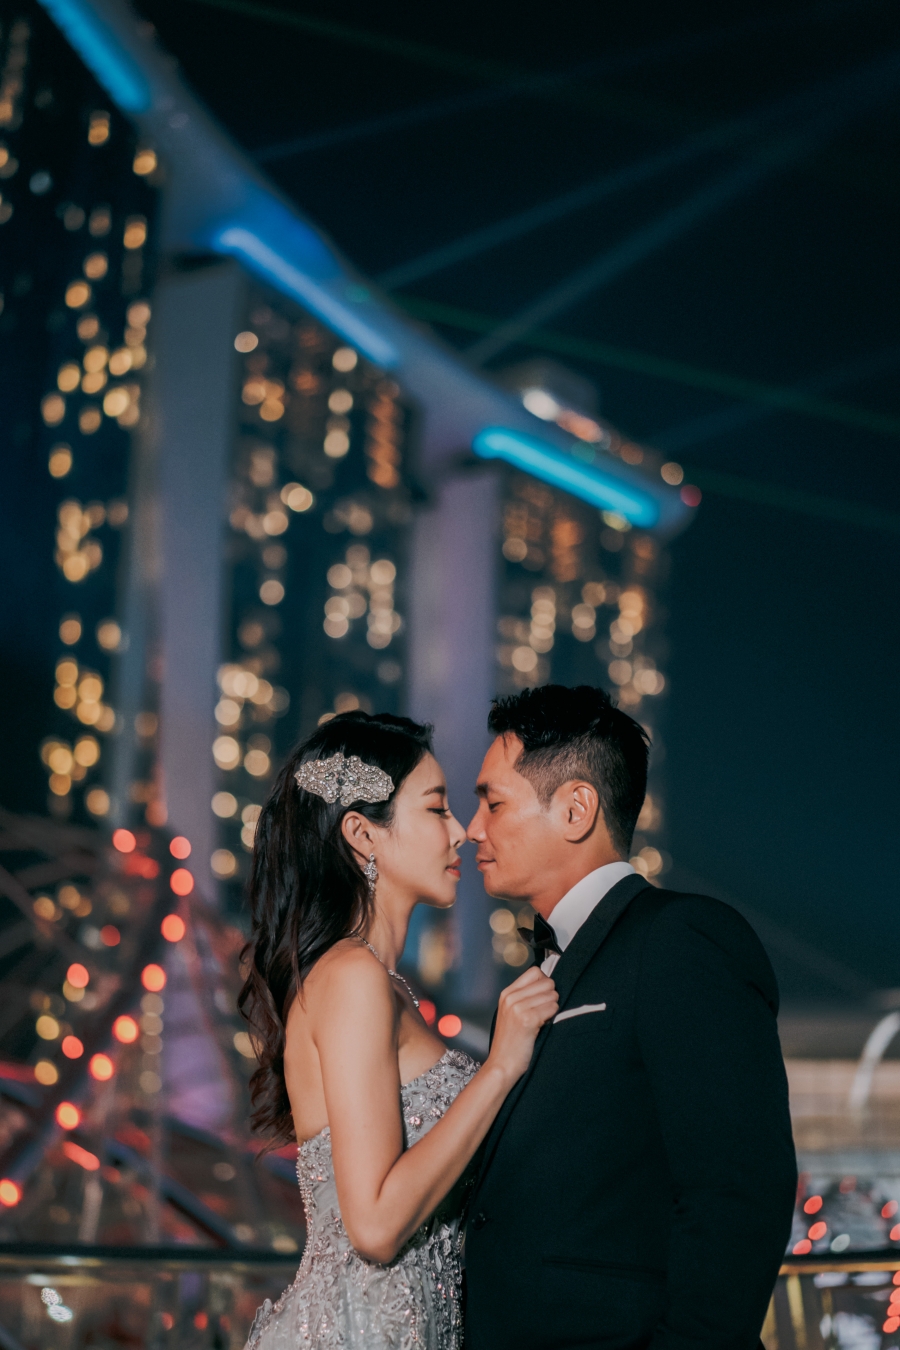 Singapore Pre-Wedding Photoshoot At Cloud Forest, Fort Canning Spiral Staircase And Marina Bay For Korean Couple  by Michael  on OneThreeOneFour 15